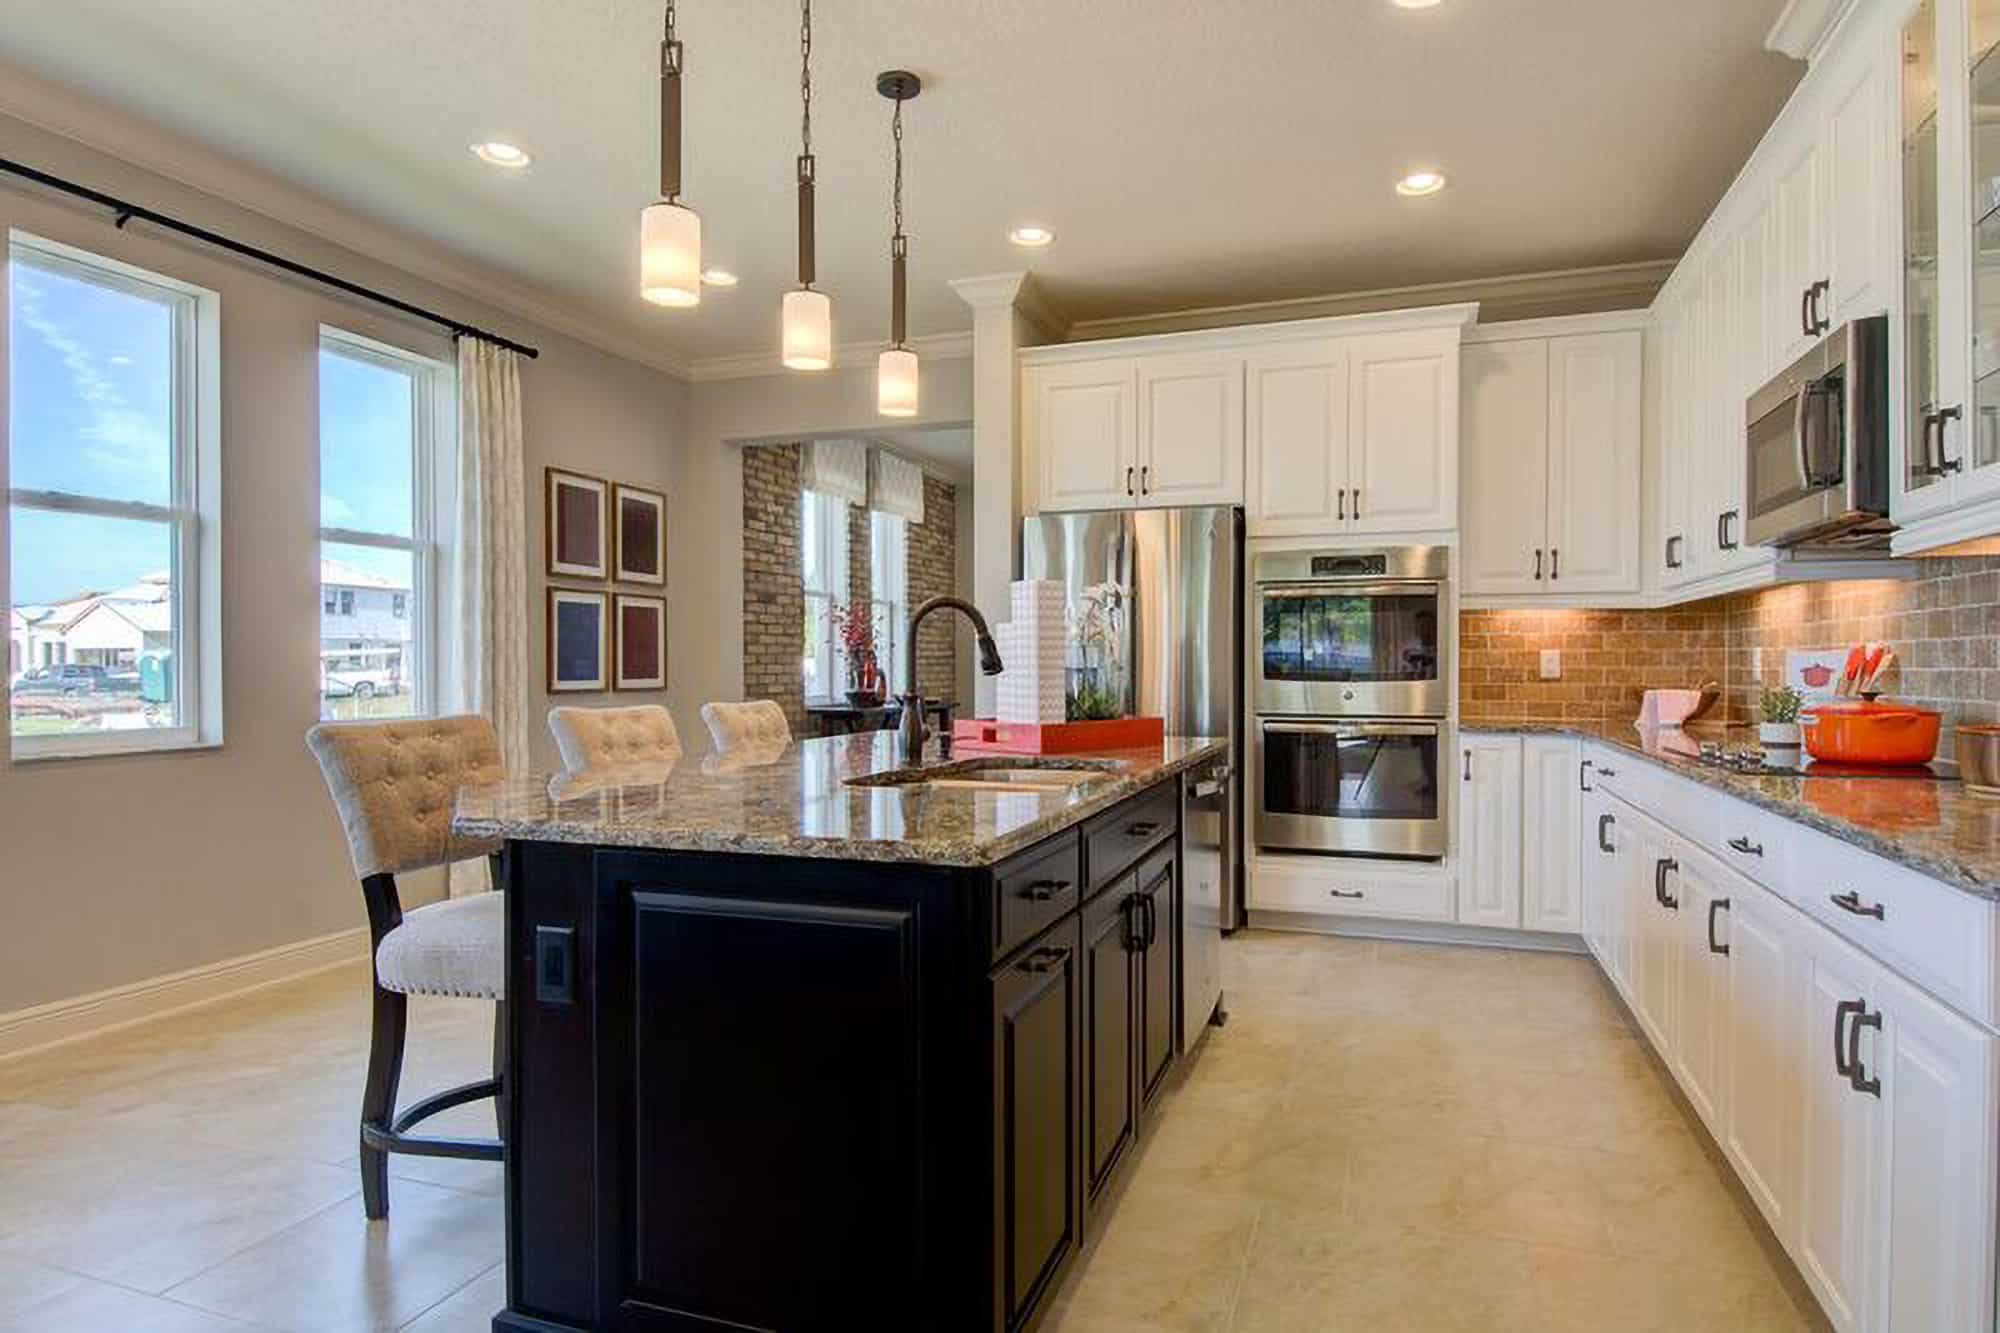 Kitchen at Braden single-family home by M/I Homes